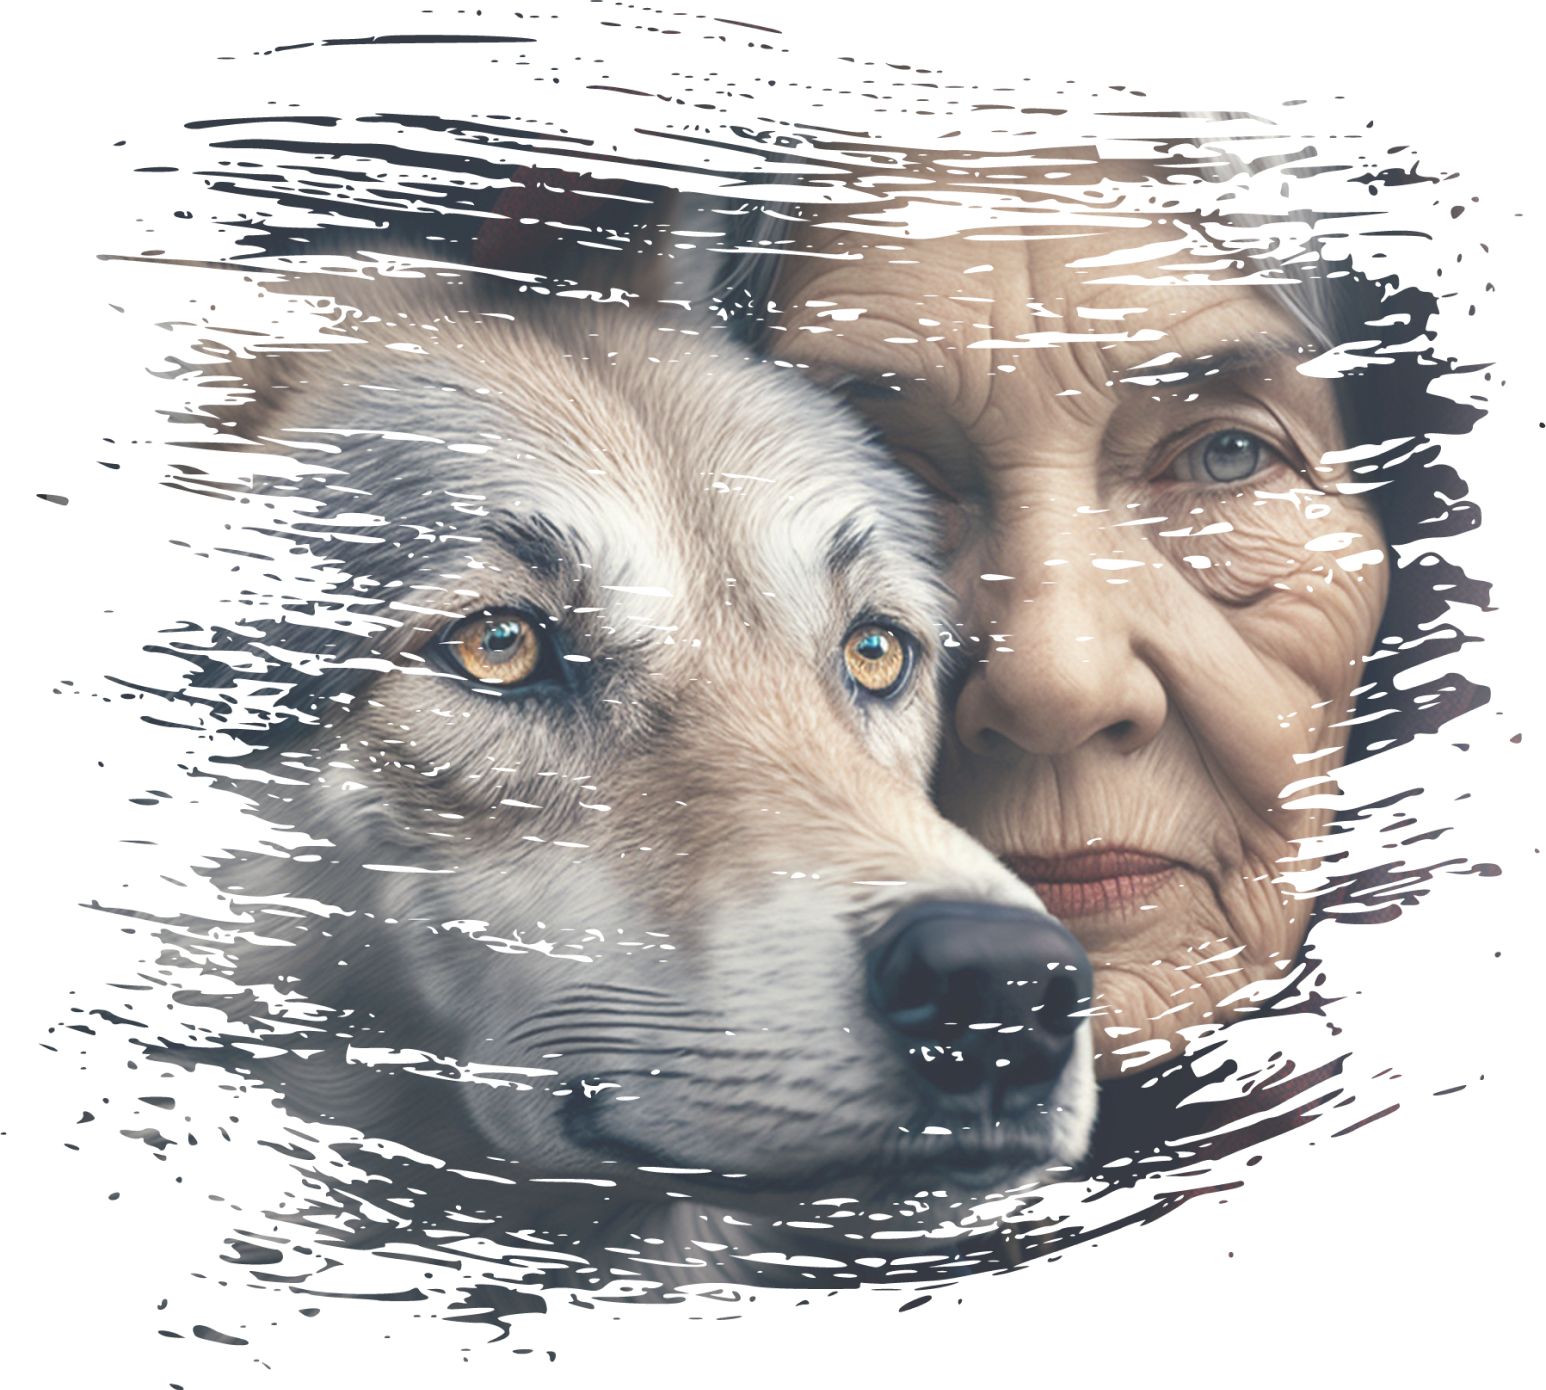 A vintage illustration of a wolf and an old woman